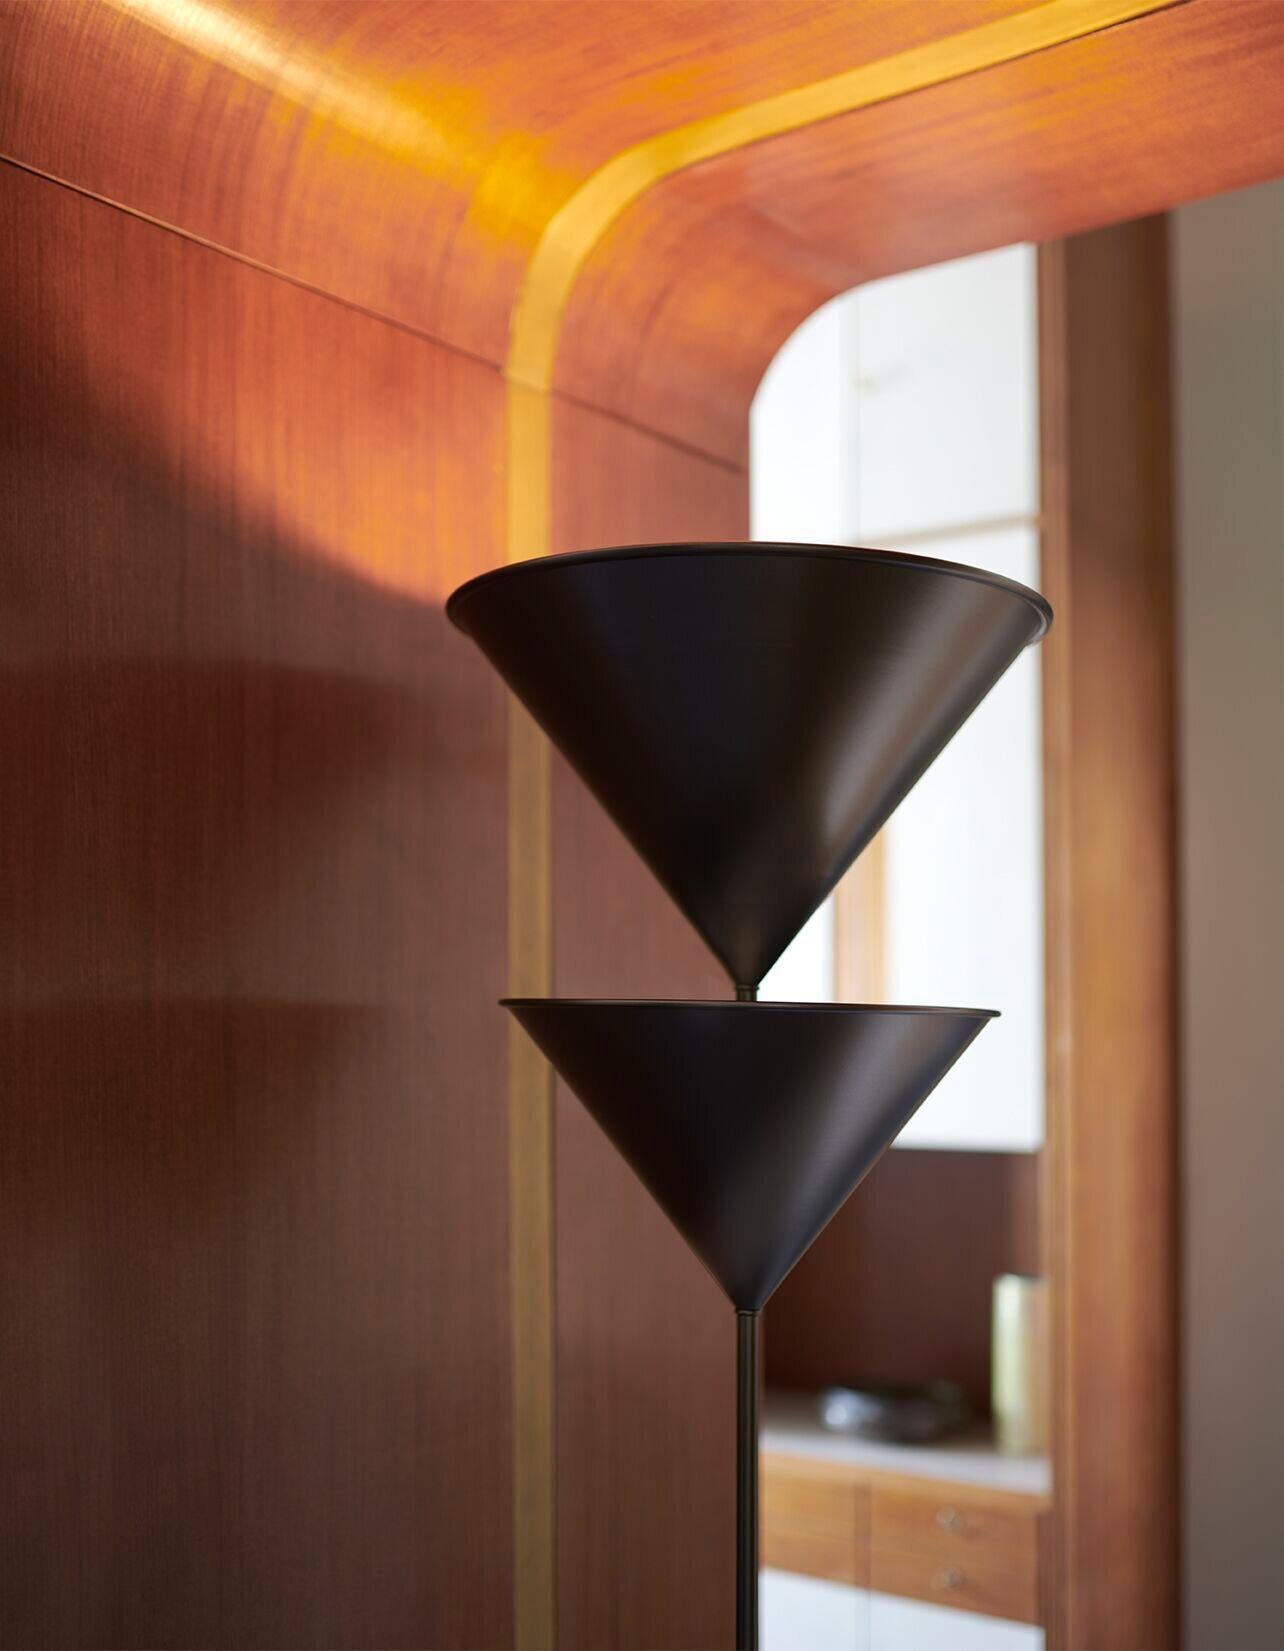 Pascal floor lamp by Vico Magistretti for Oluce. Originally designed in Italy, 1983. Oluce's newest offering of this model comes in plated, anodized bronze. This is a current edition floor lamp giving indirect and reflected light with an independent